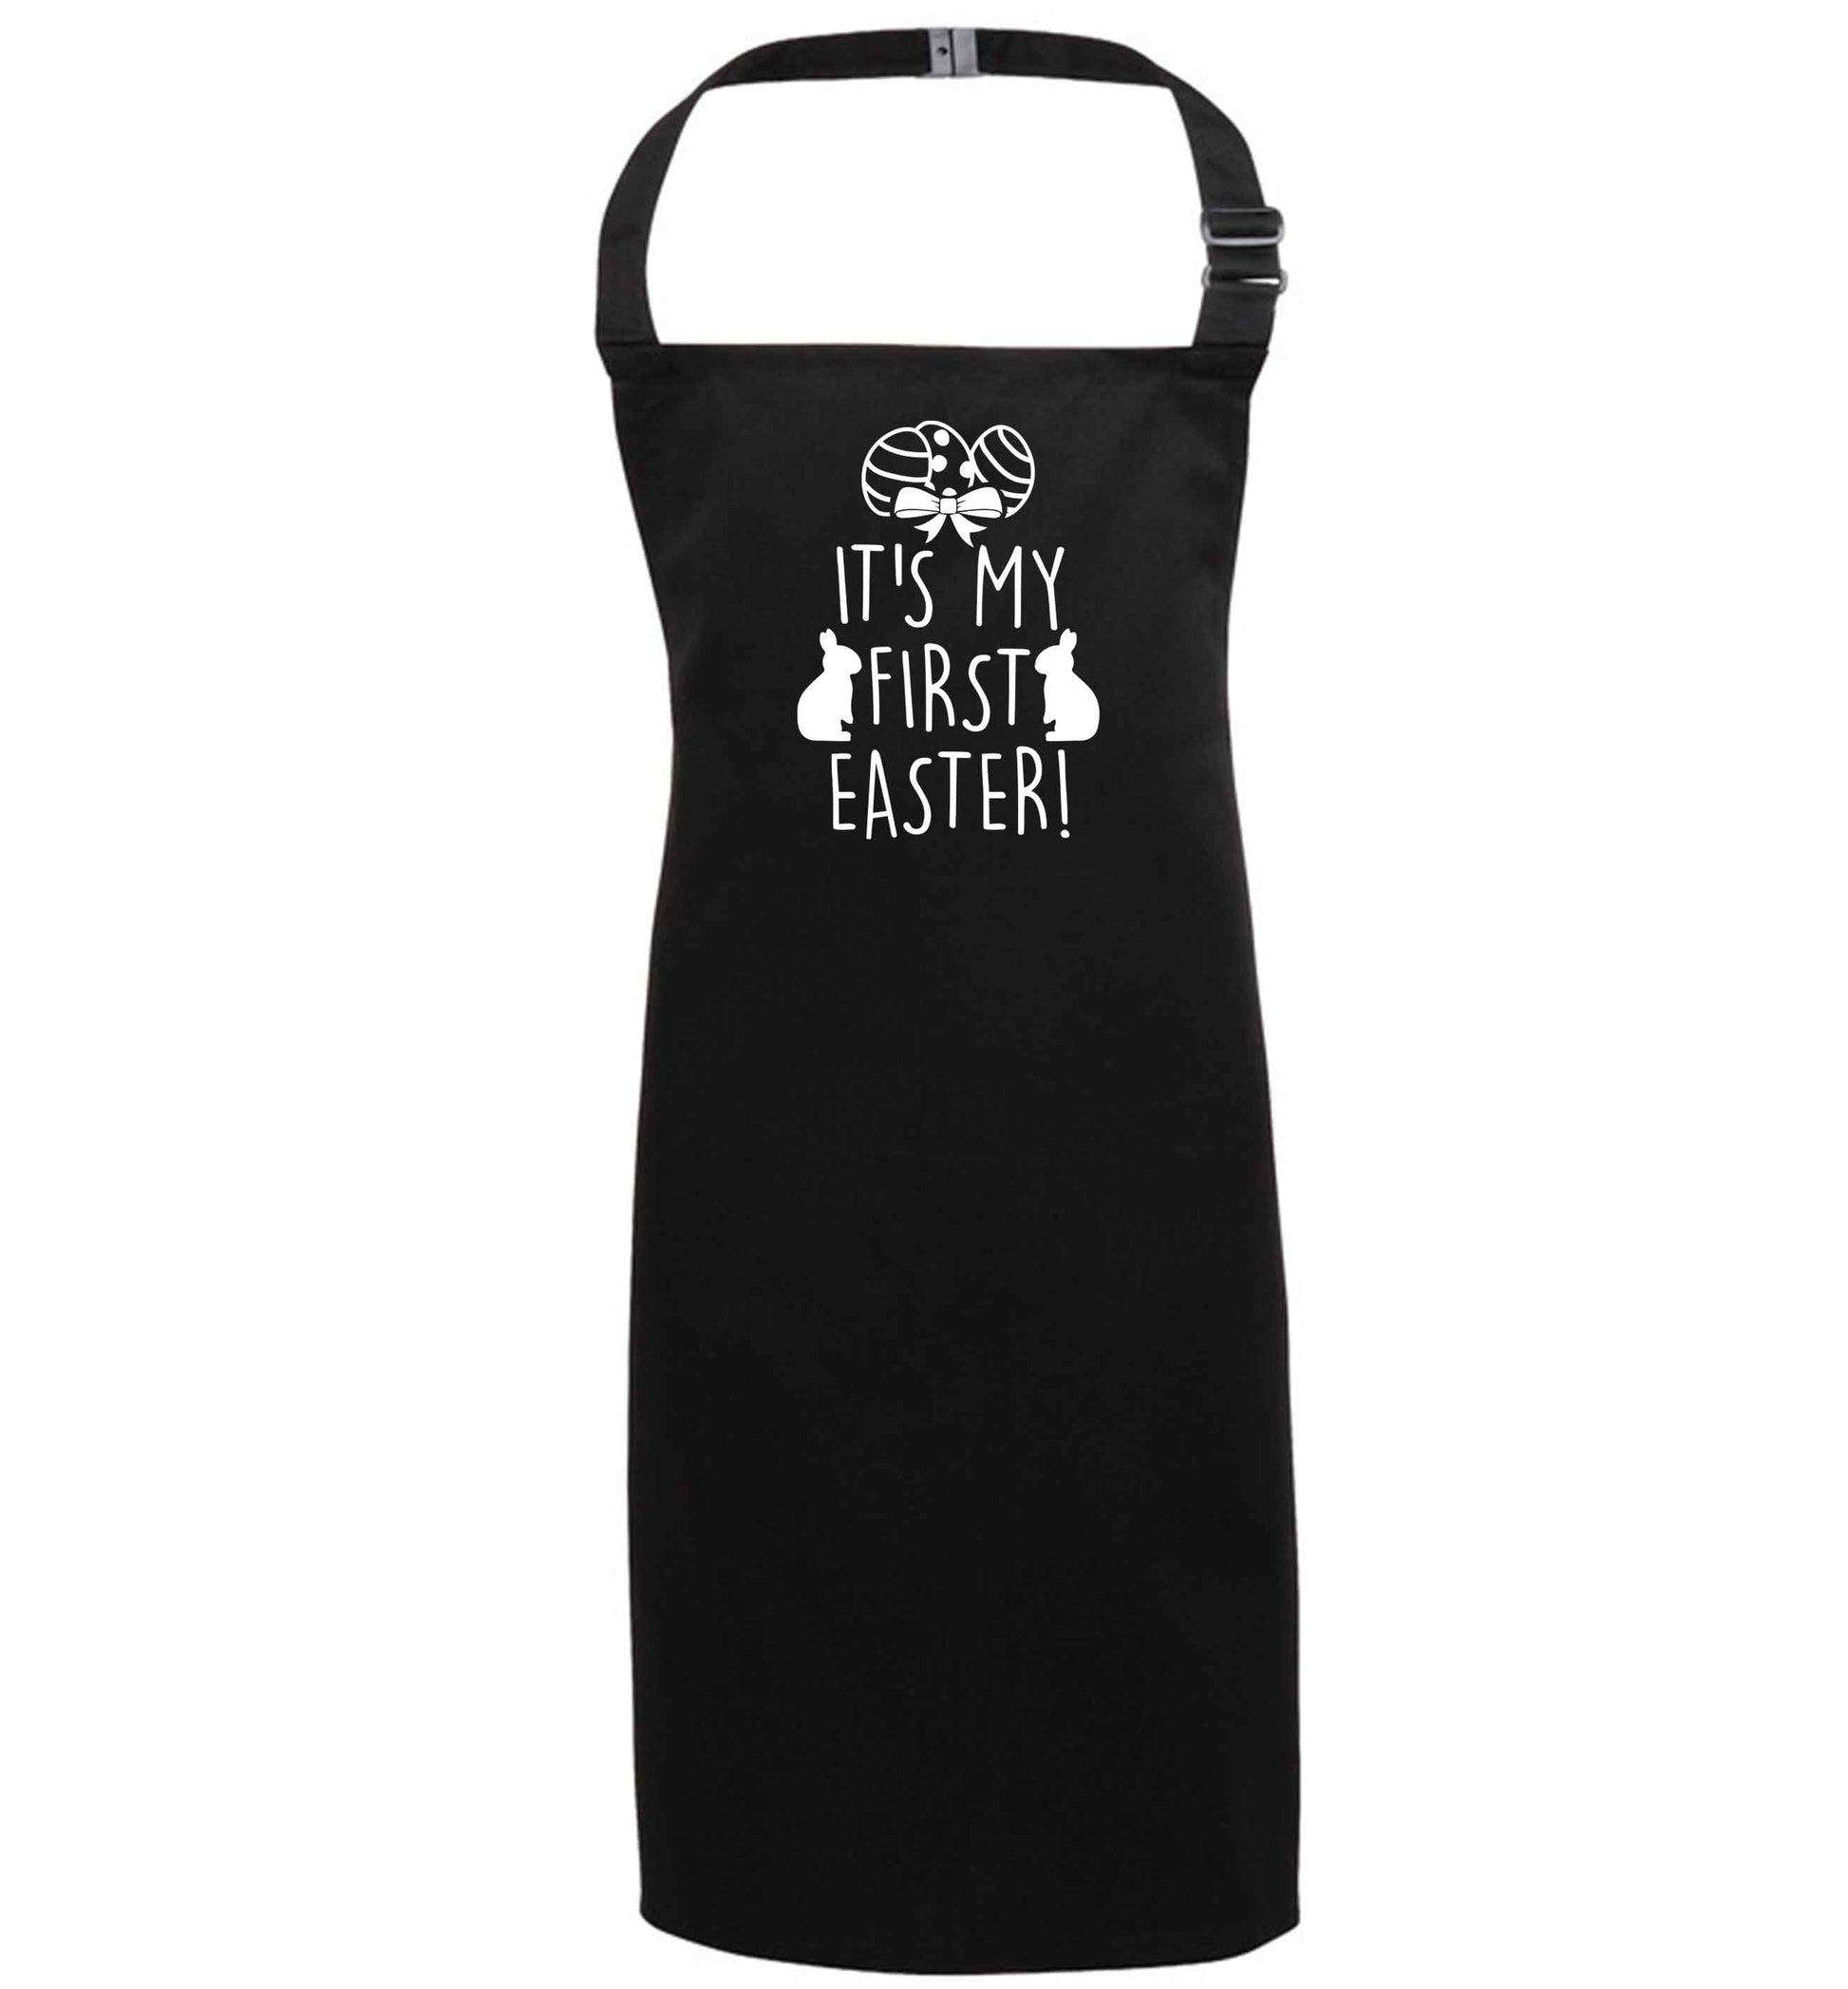 It's my first Easter black apron 7-10 years